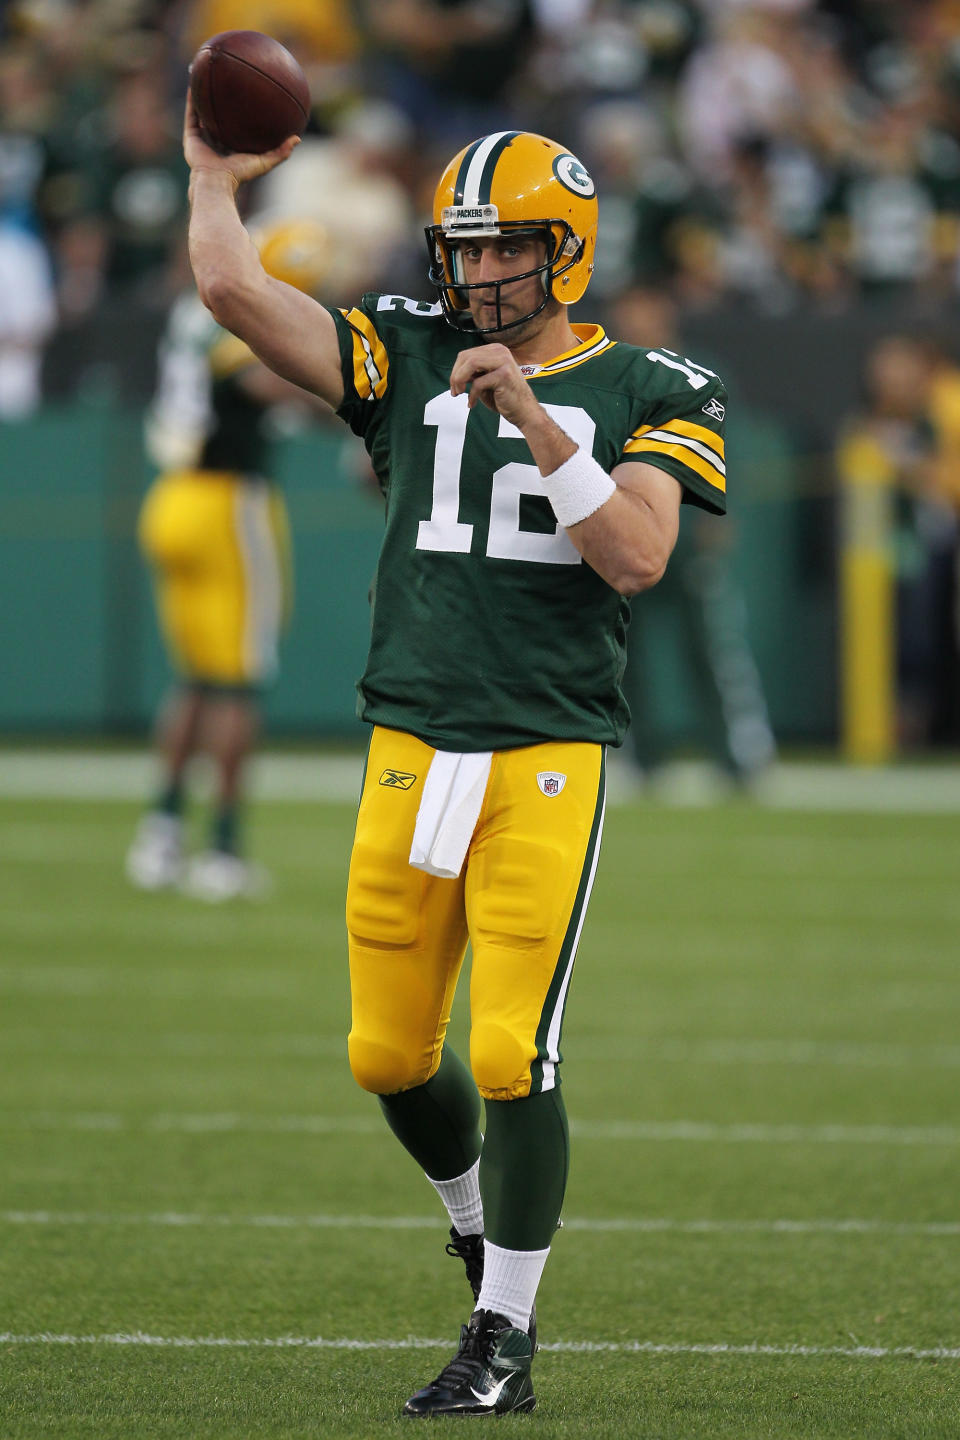 GREEN BAY, WI - SEPTEMBER 08: Aaron Rodgers #12 of the Green Bay Packers warms up before taking on the New Orleans Saints in the season opening game at Lambeau Field on September 8, 2011 in Green Bay, Wisconsin. (Photo by Jonathan Daniel/Getty Images)